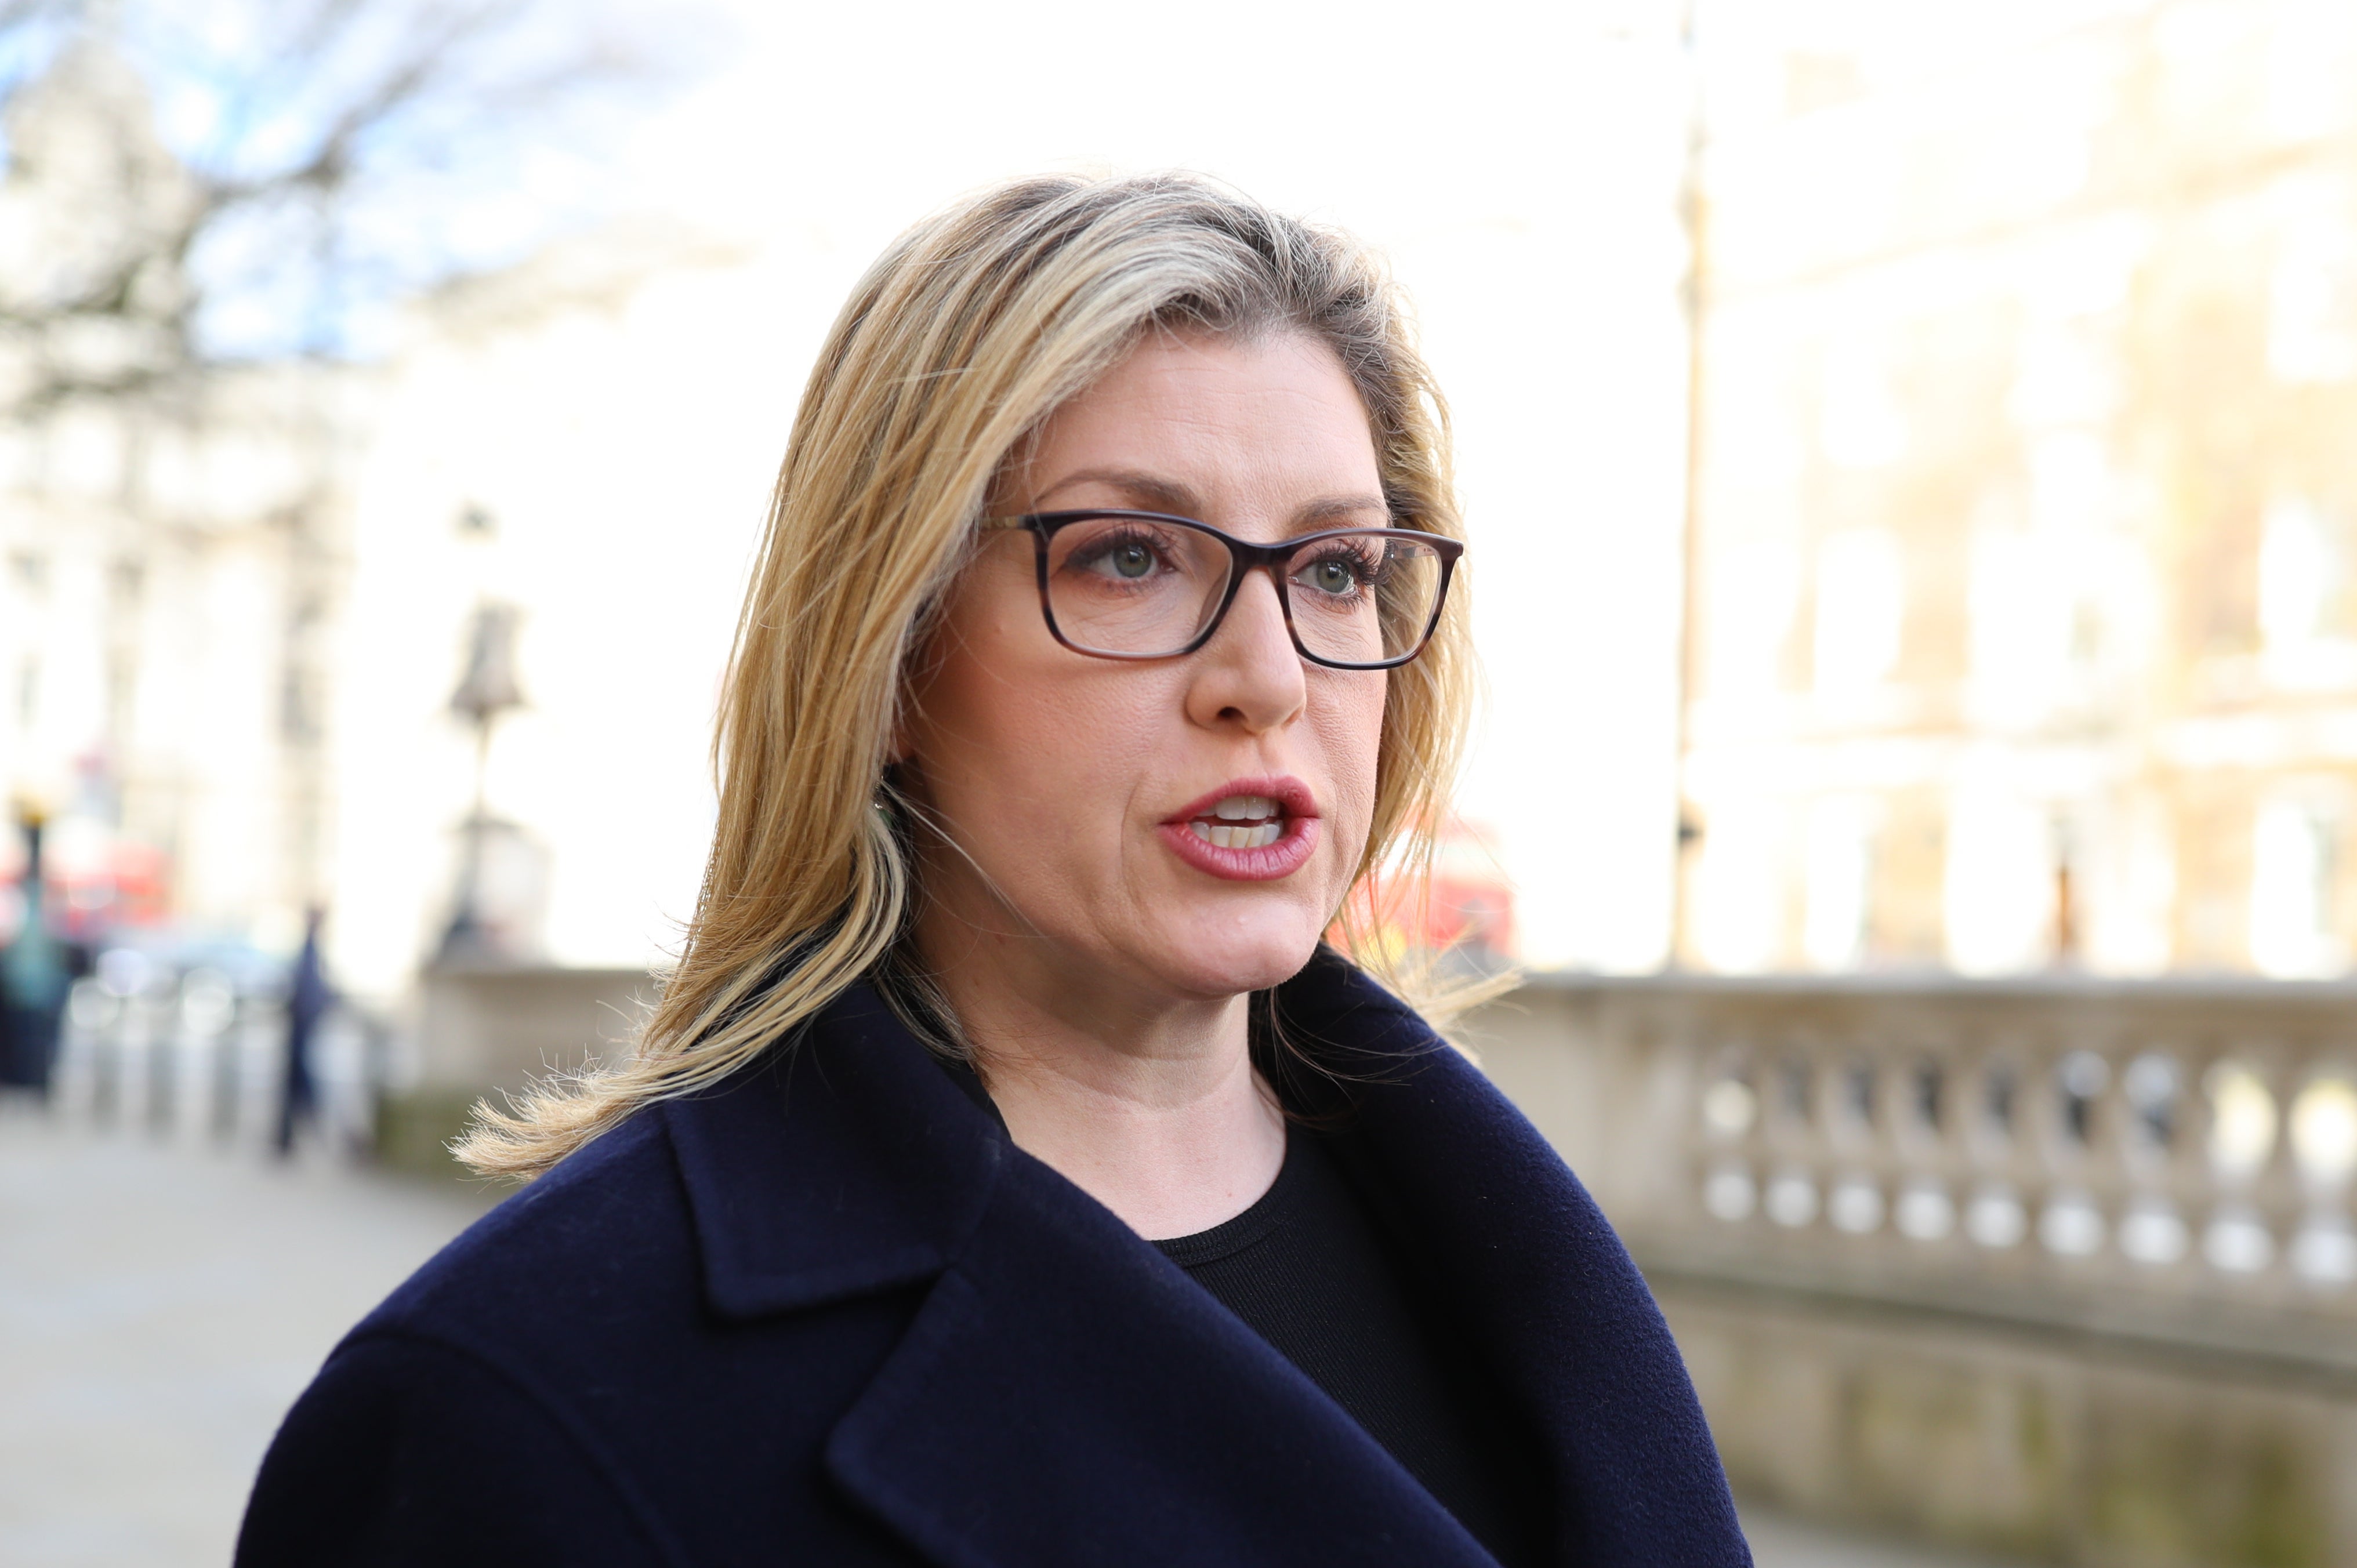 Penny Mordaunt was a key player in the campaign to take the UK out of the EU